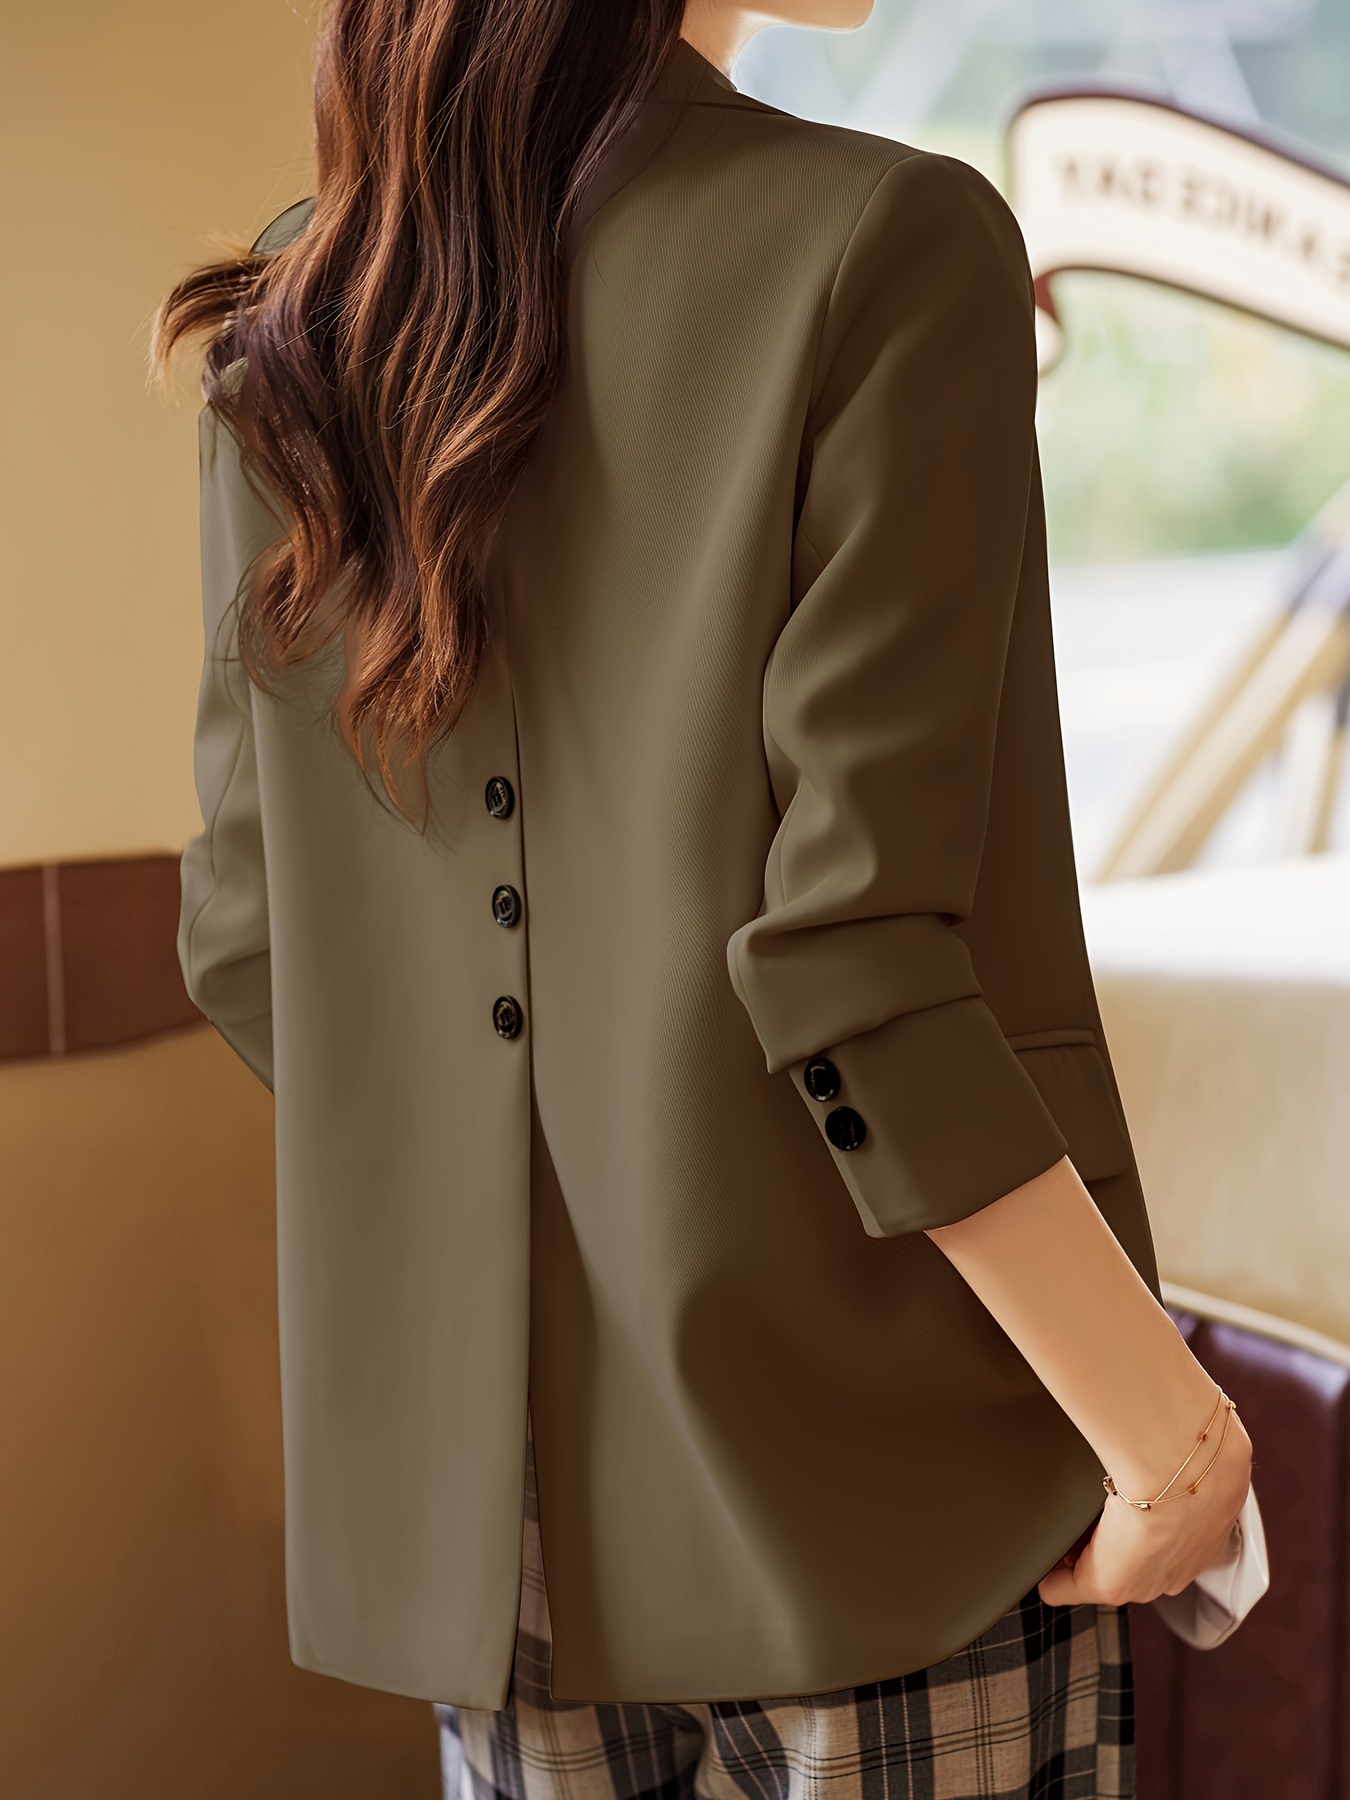 Notched Collar Button Front Blazer, Elegant Long Sleeve Blazer For Office & Work, Women s Clothing details 12